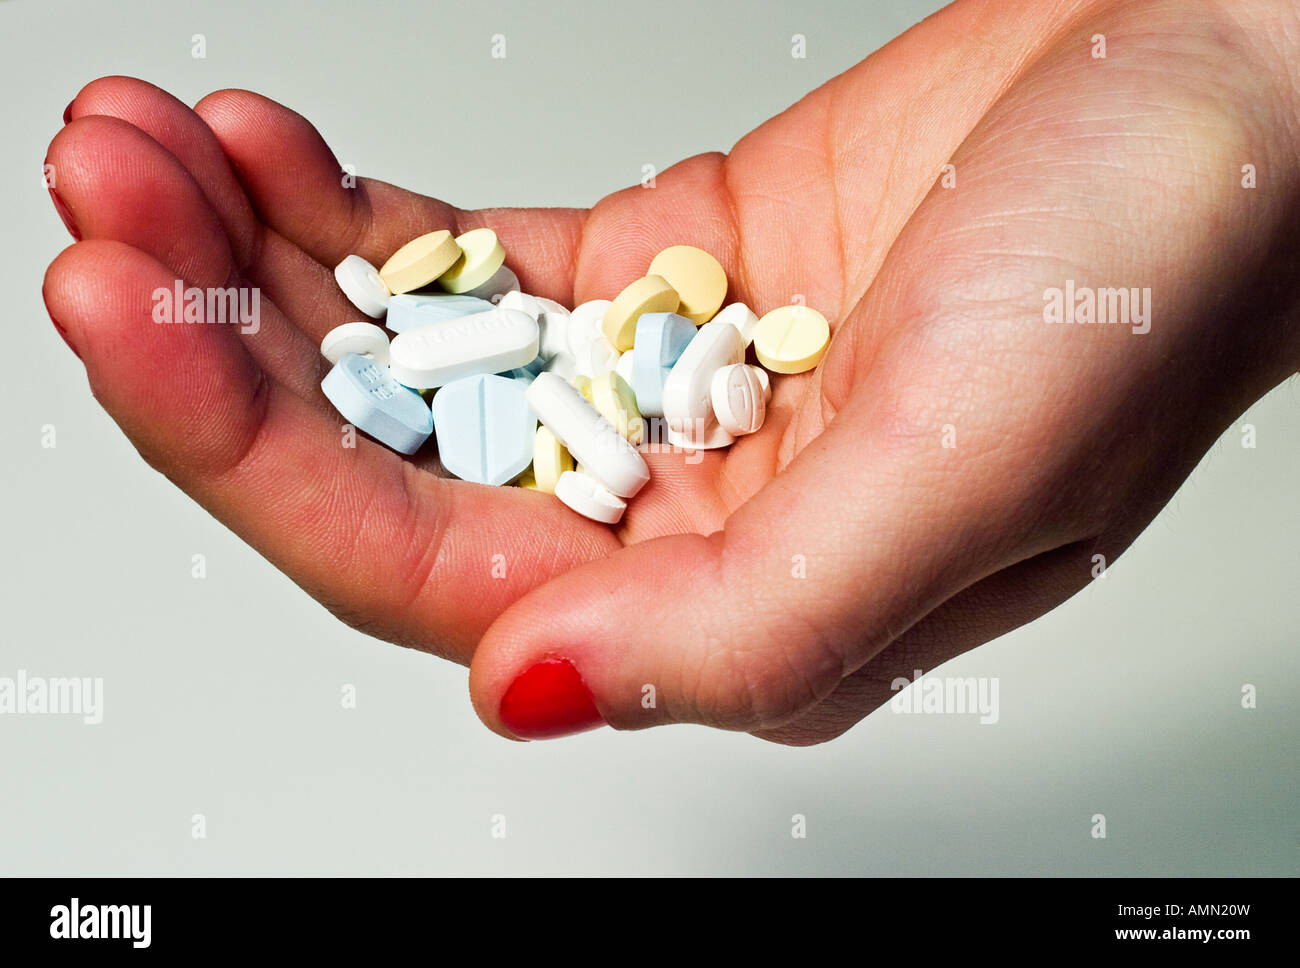 Hand holding pills (trademarks and logos in place) Stock Photo